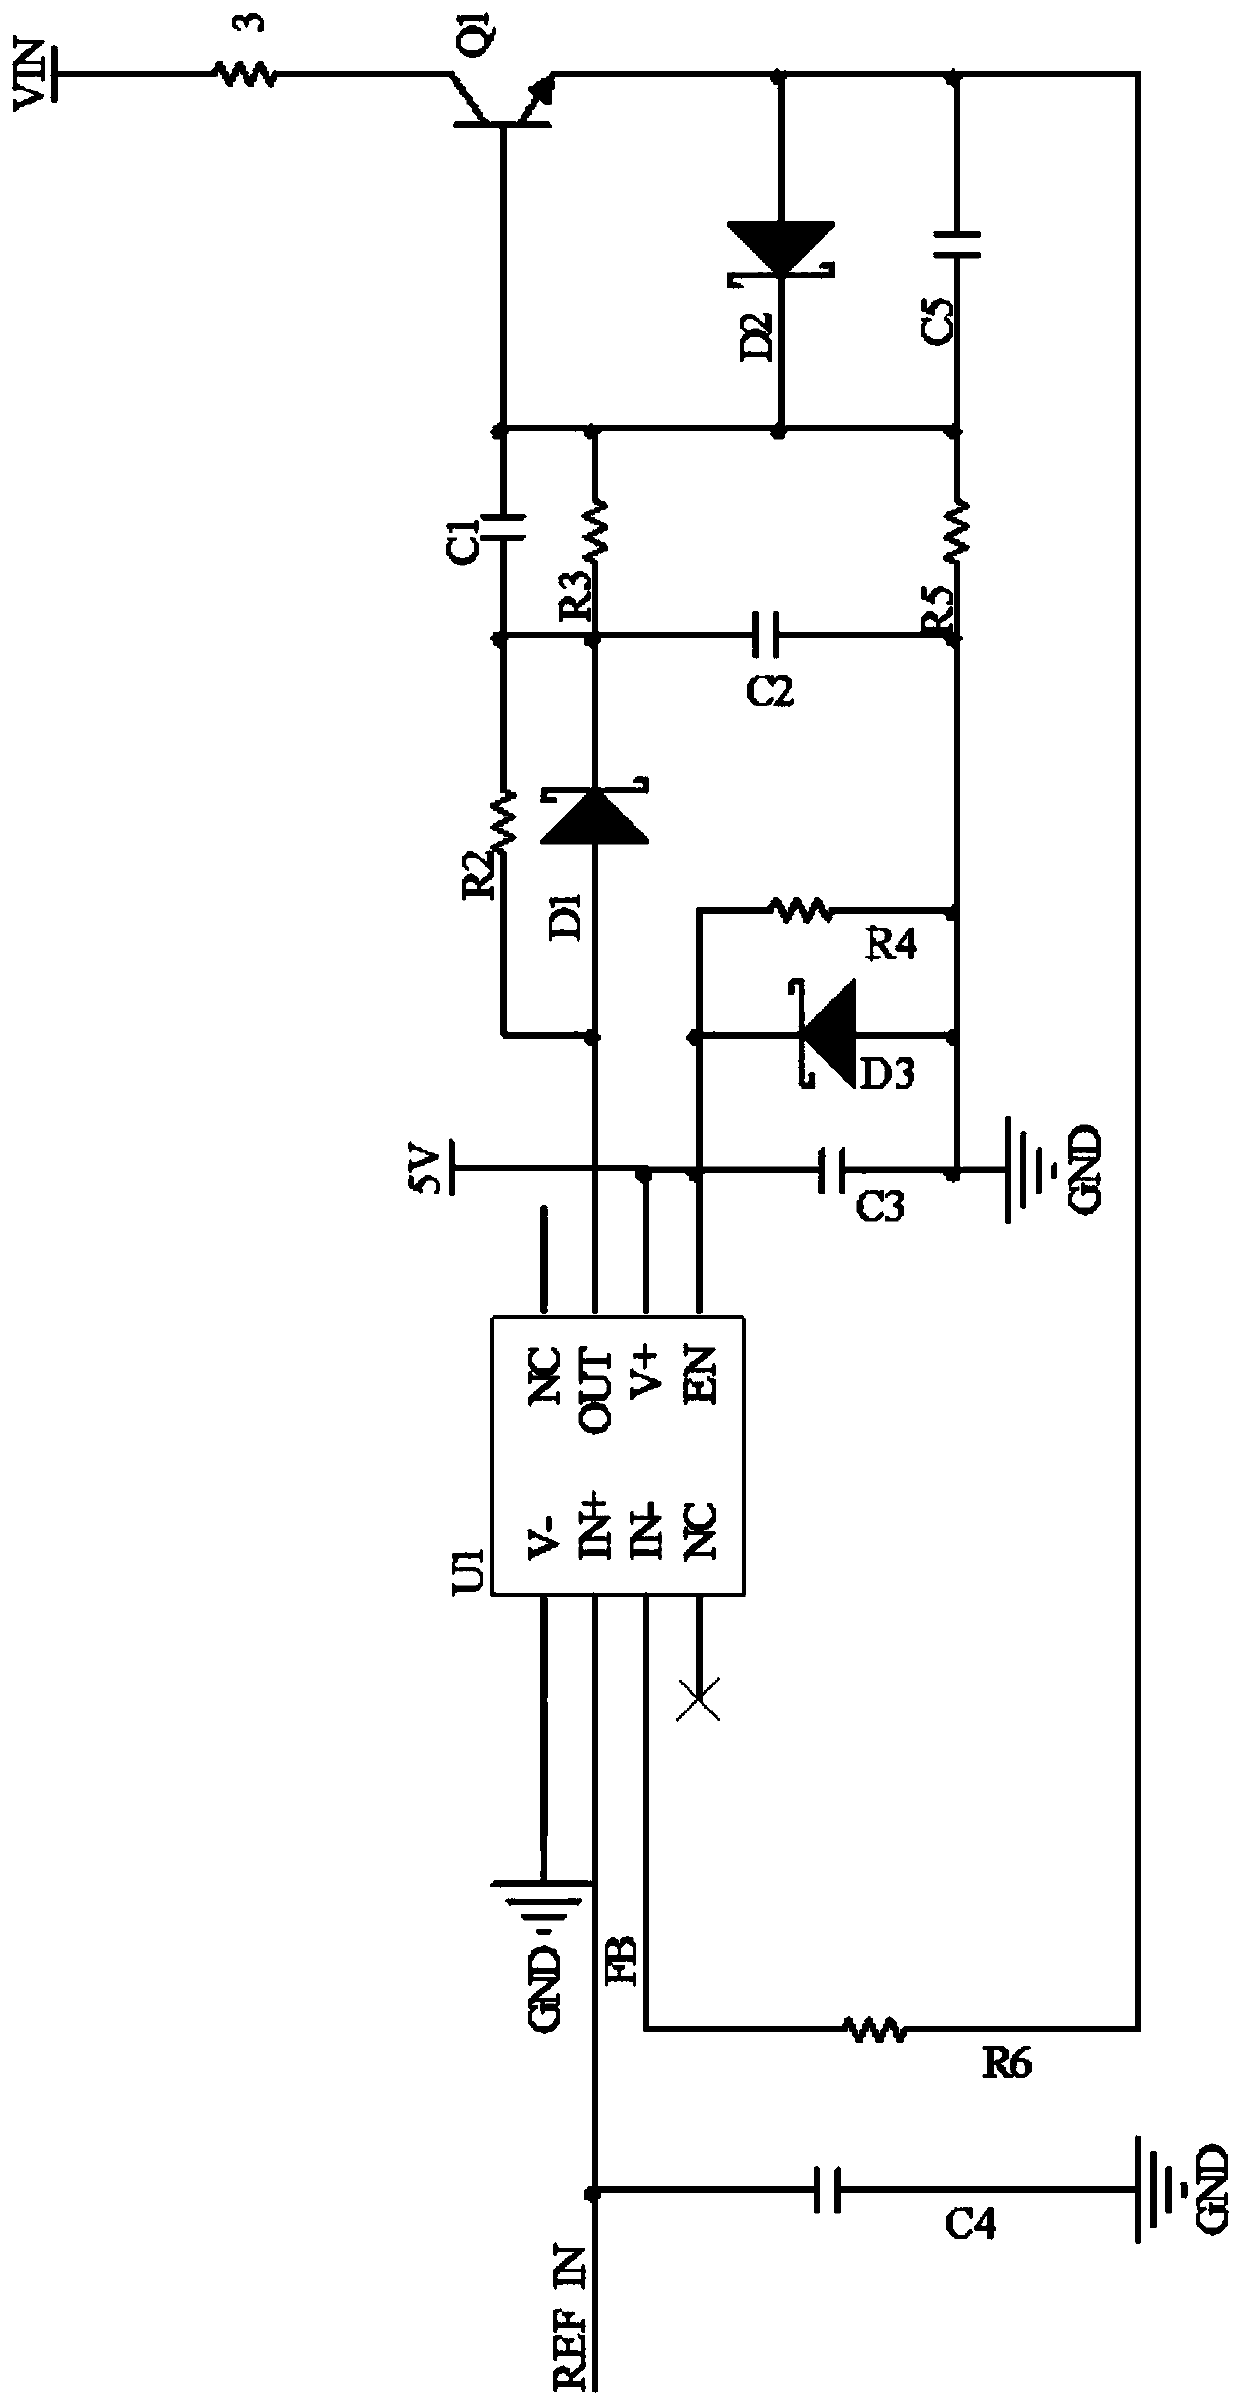 Numerical control current conversion system adopting parallel decoding mode